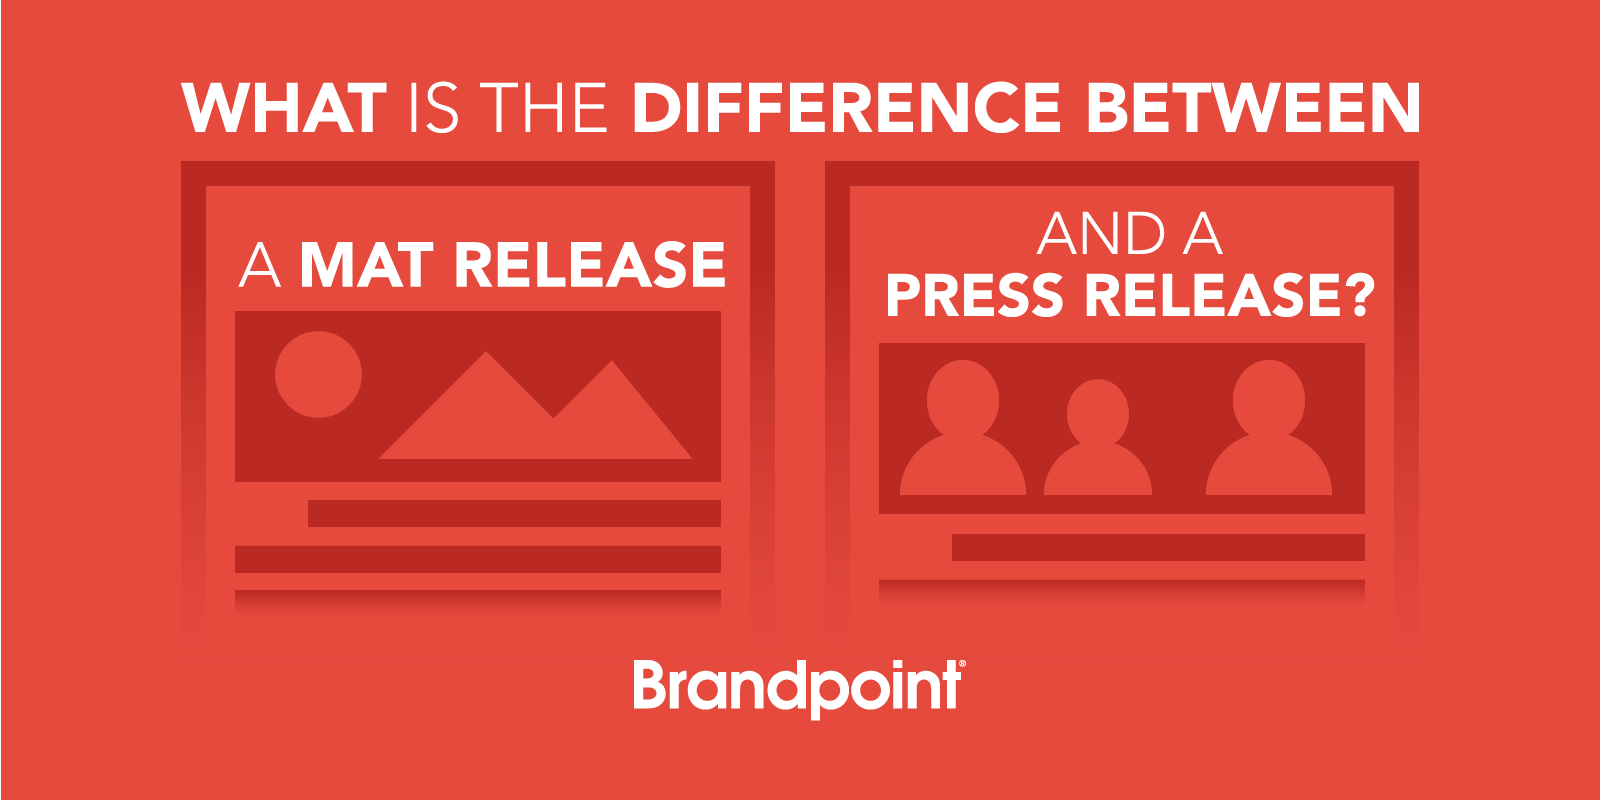 BlogImage_What Is The Difference Between A MAT Release And A Press Release-01